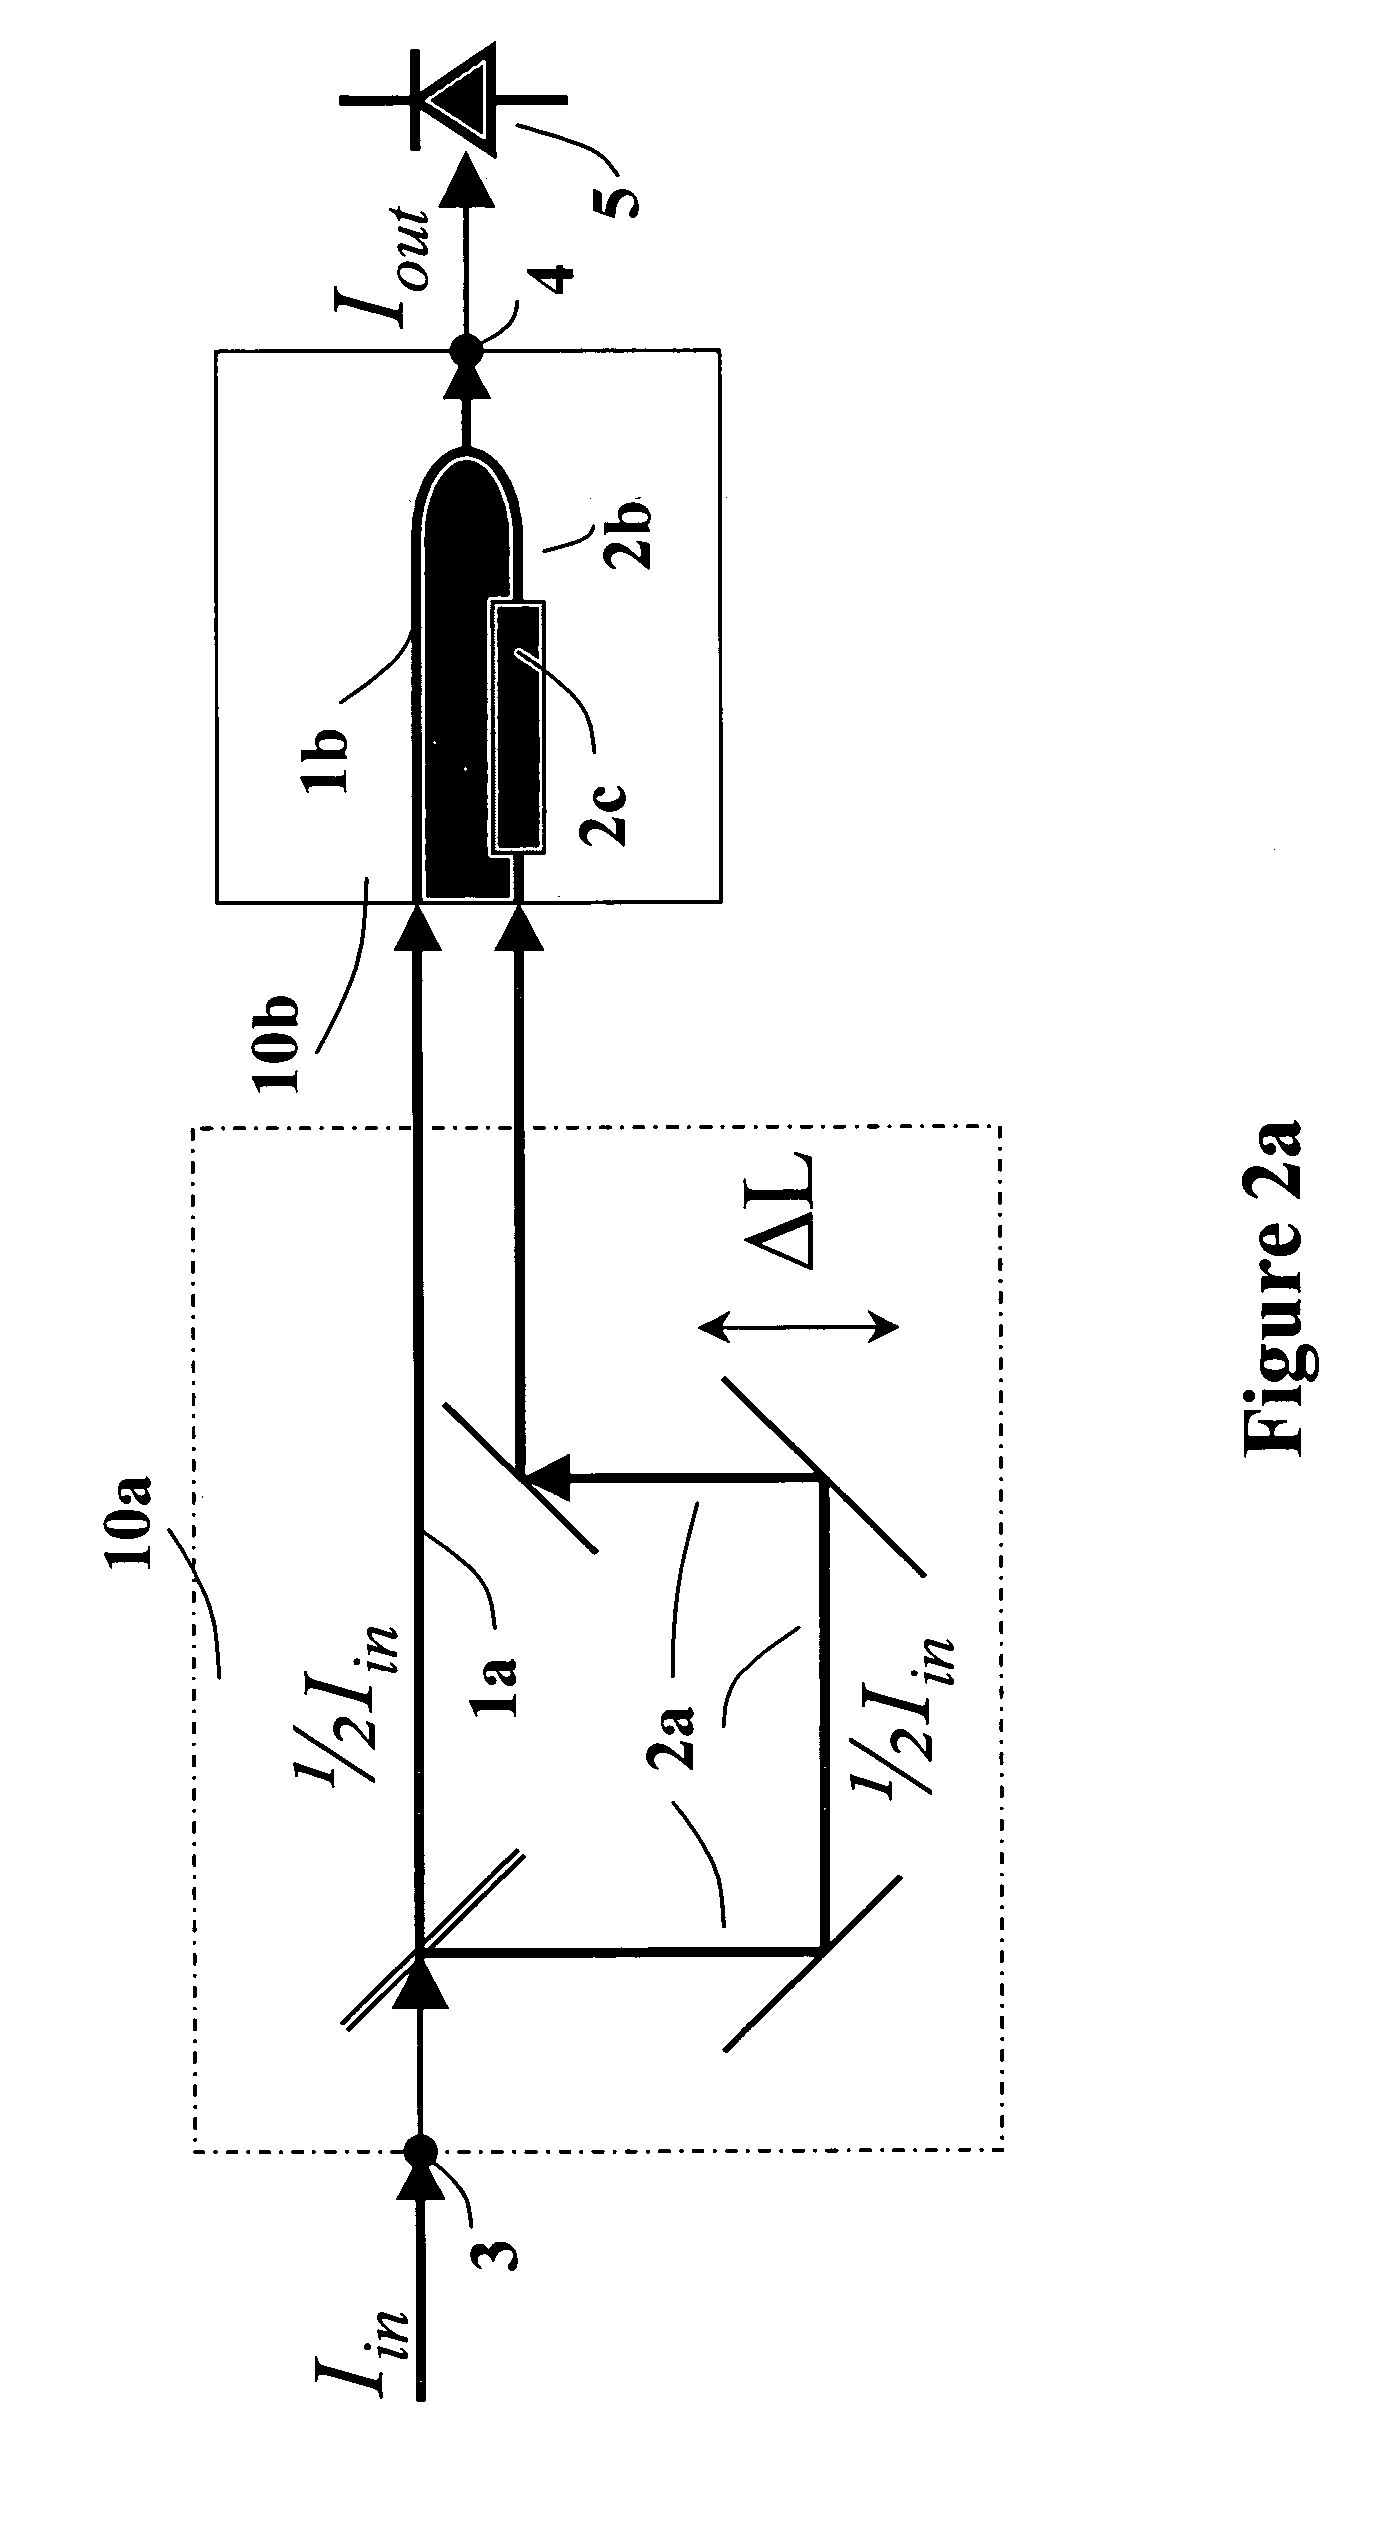 Apparatus and method for characterizing pulsed optical signals